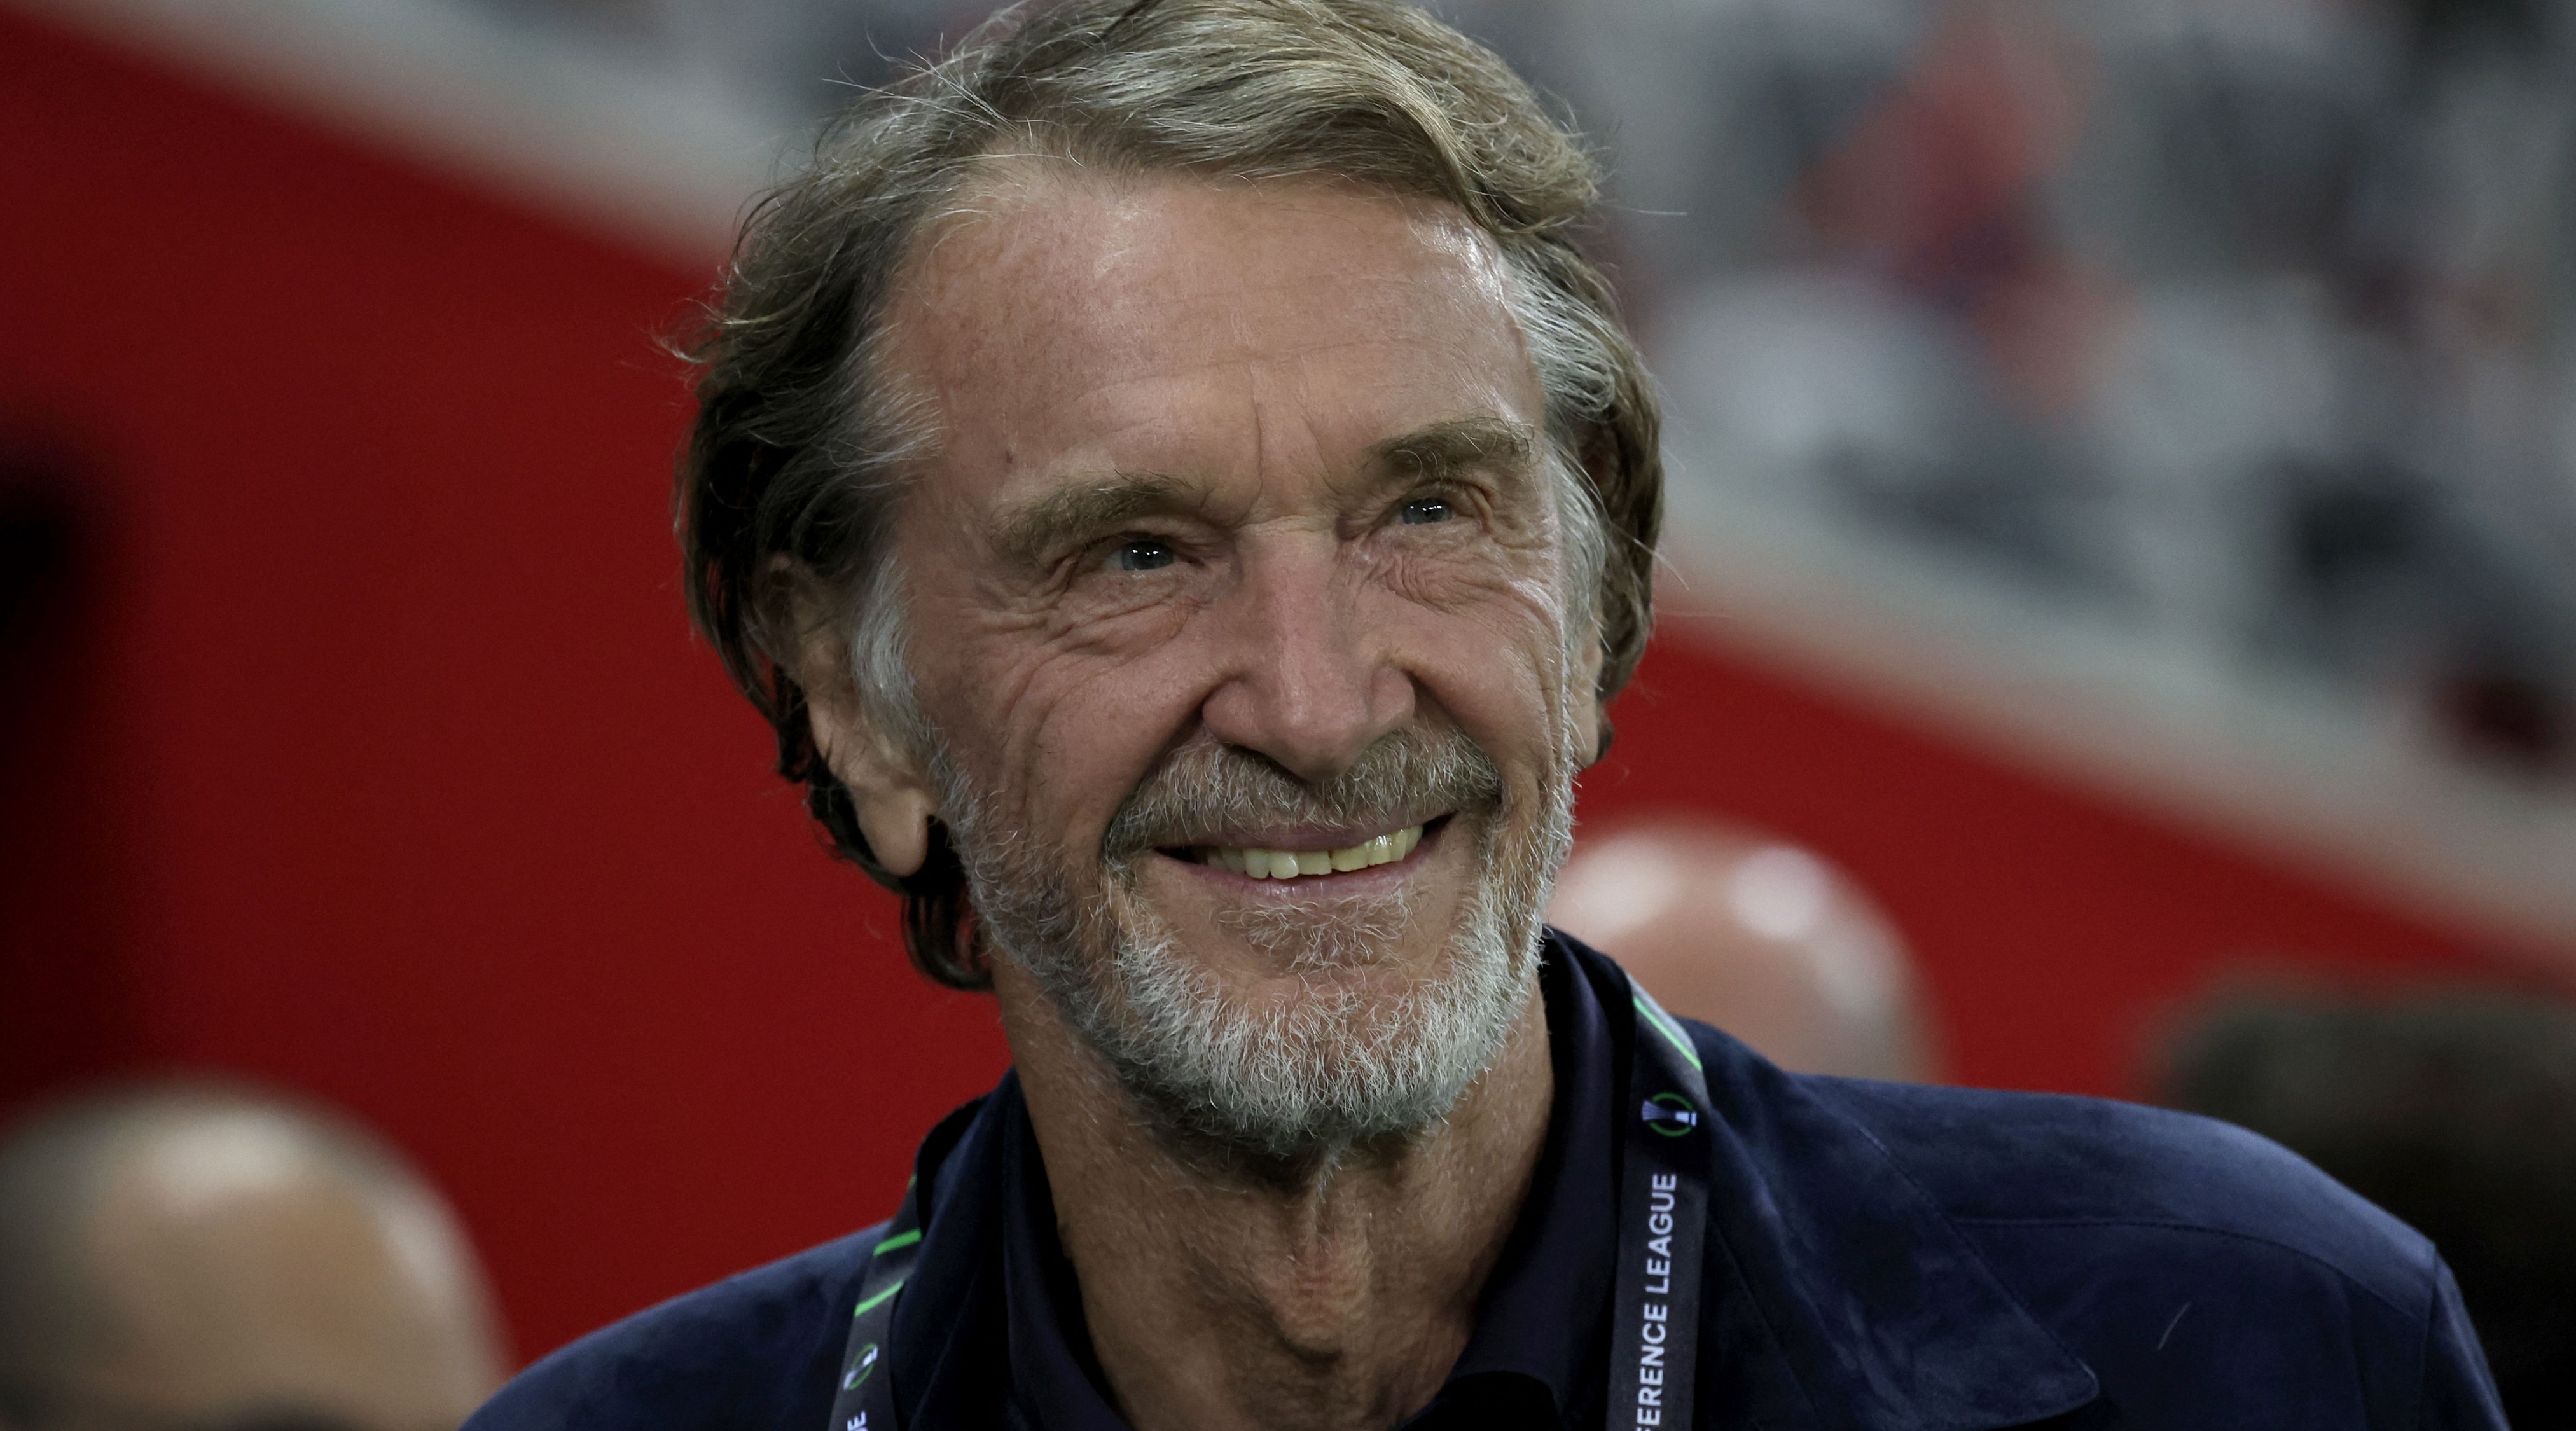 British INEOS Group chairman Jim Ratcliffe looks on ahead of the UEFA Europa Conference League second-leg quarter final football match between Nice (OGCN) and FC Basel at the Allianz Riviera in Nice, on April 20, 2023.